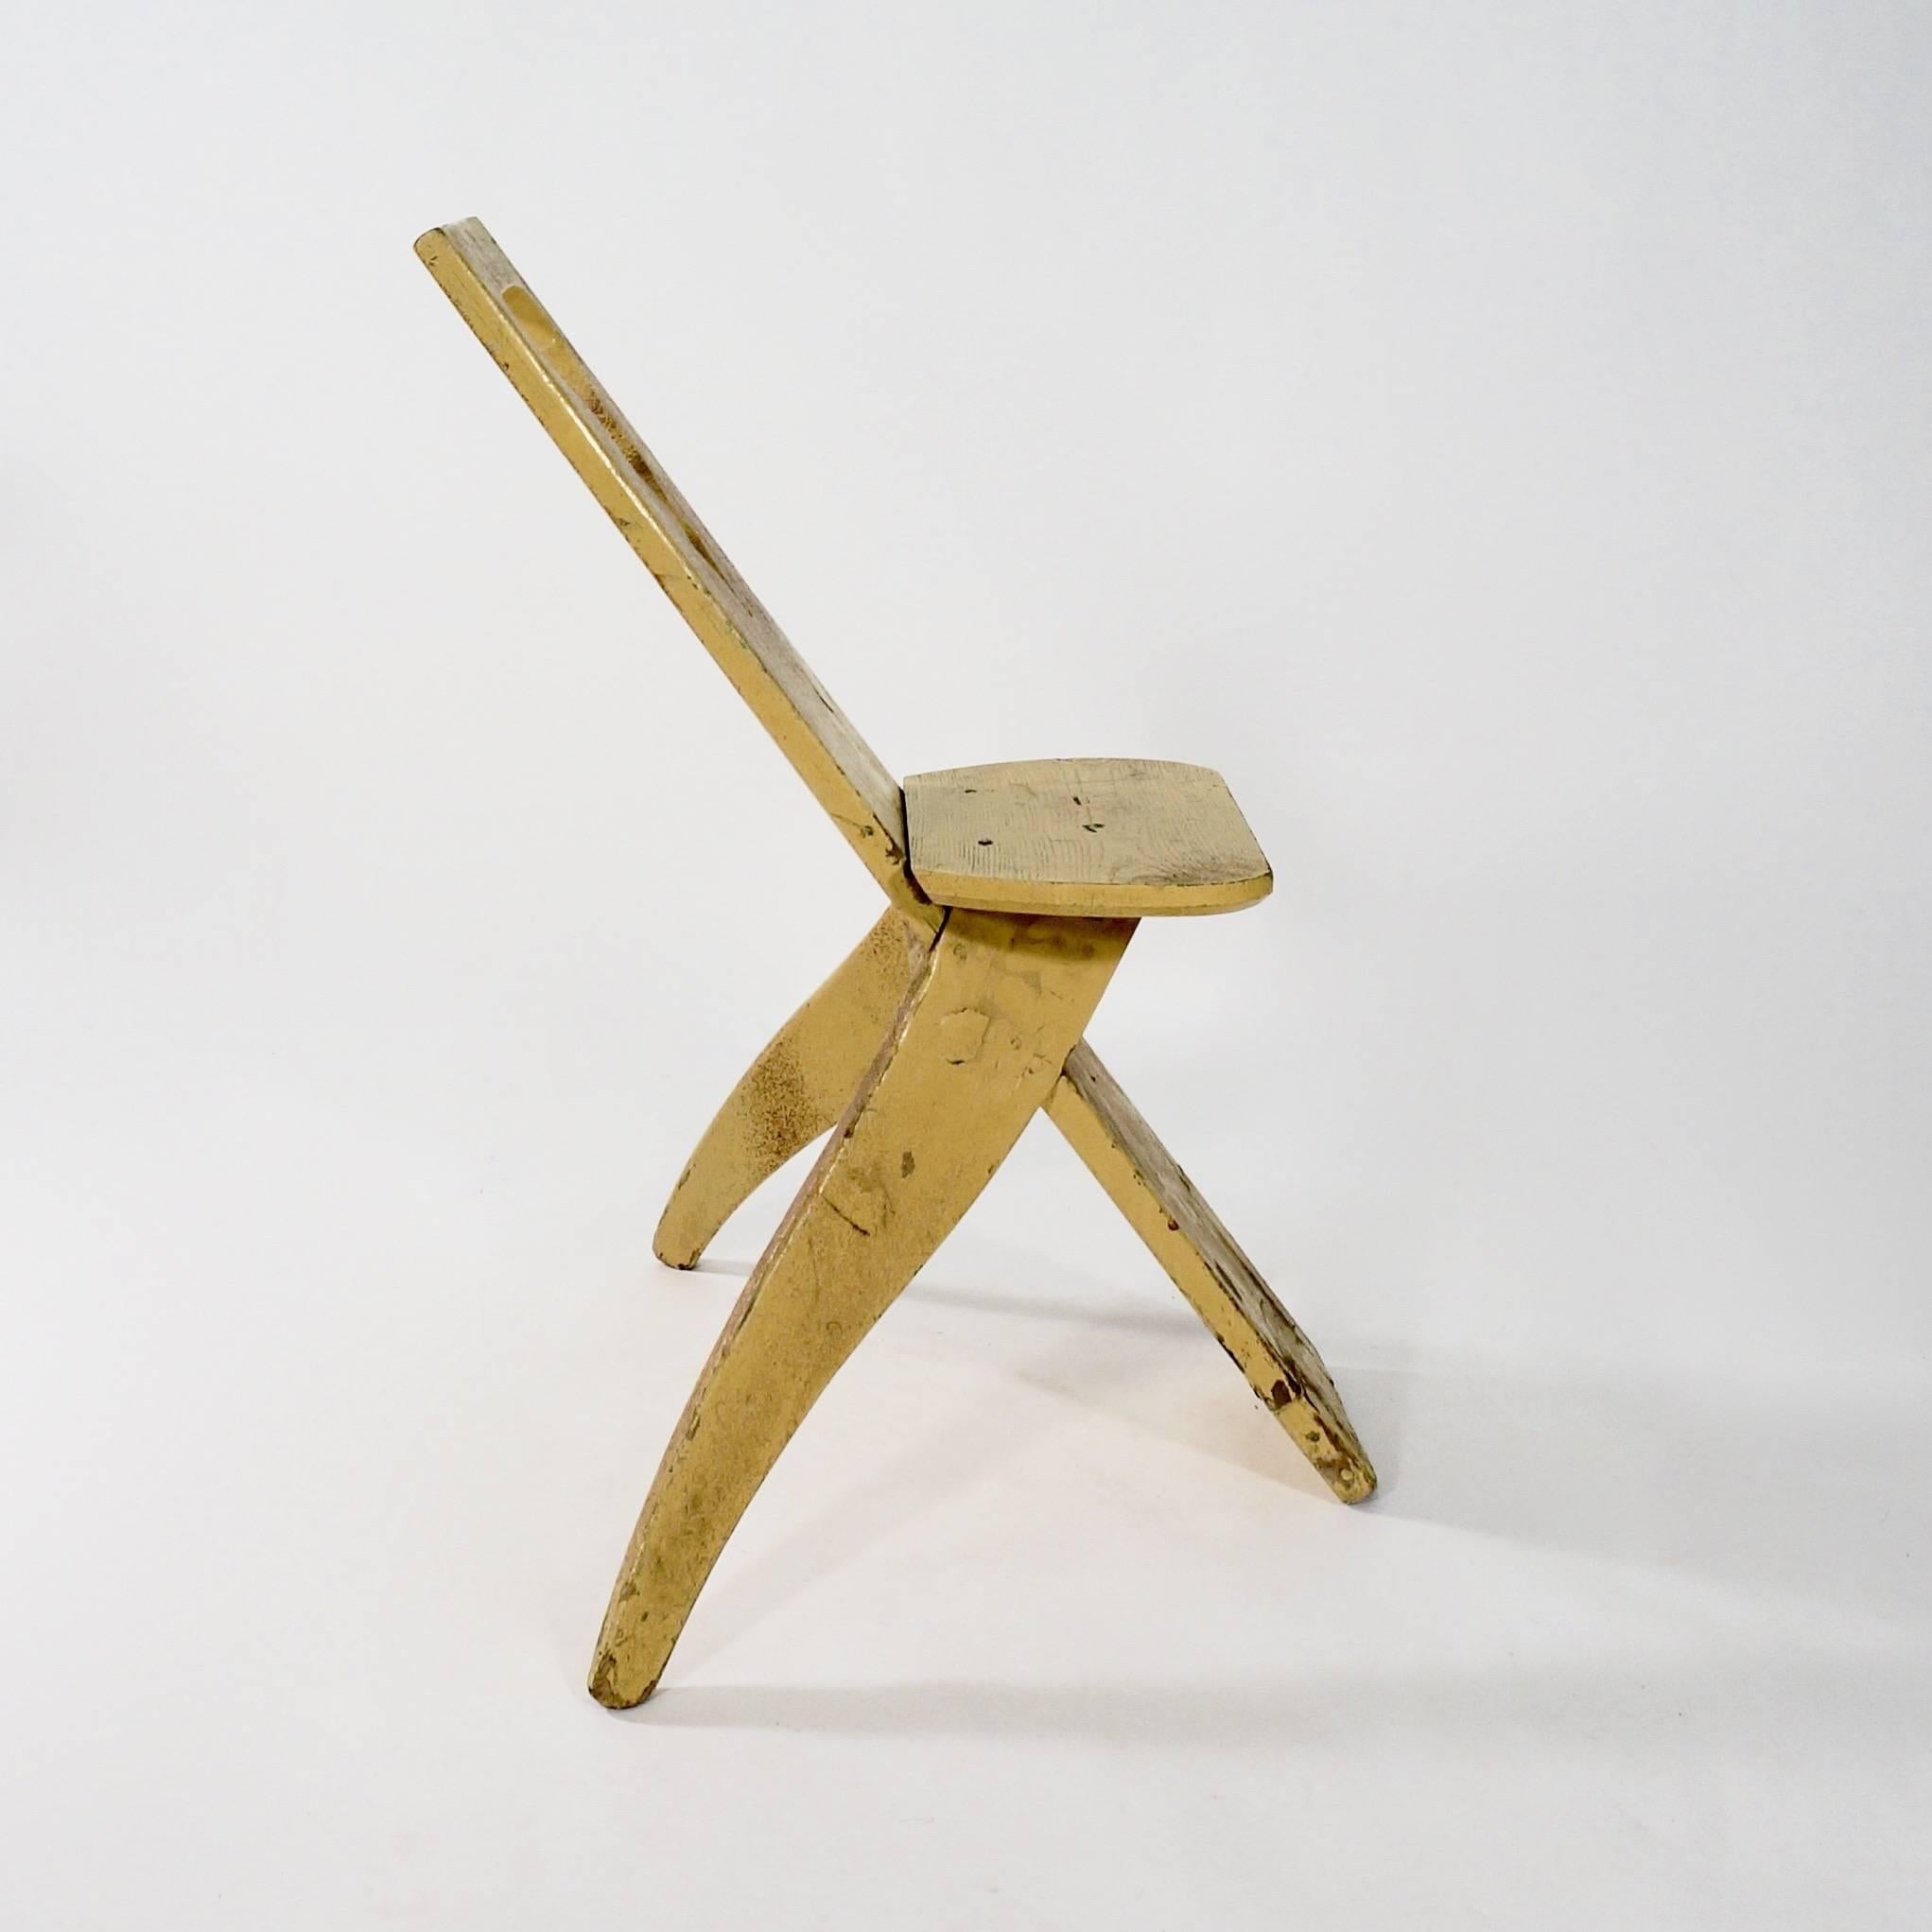 The plank back with a pierced motif with two shaped splaying back legs supporting a simple seat.

Sweden, circa 1900.